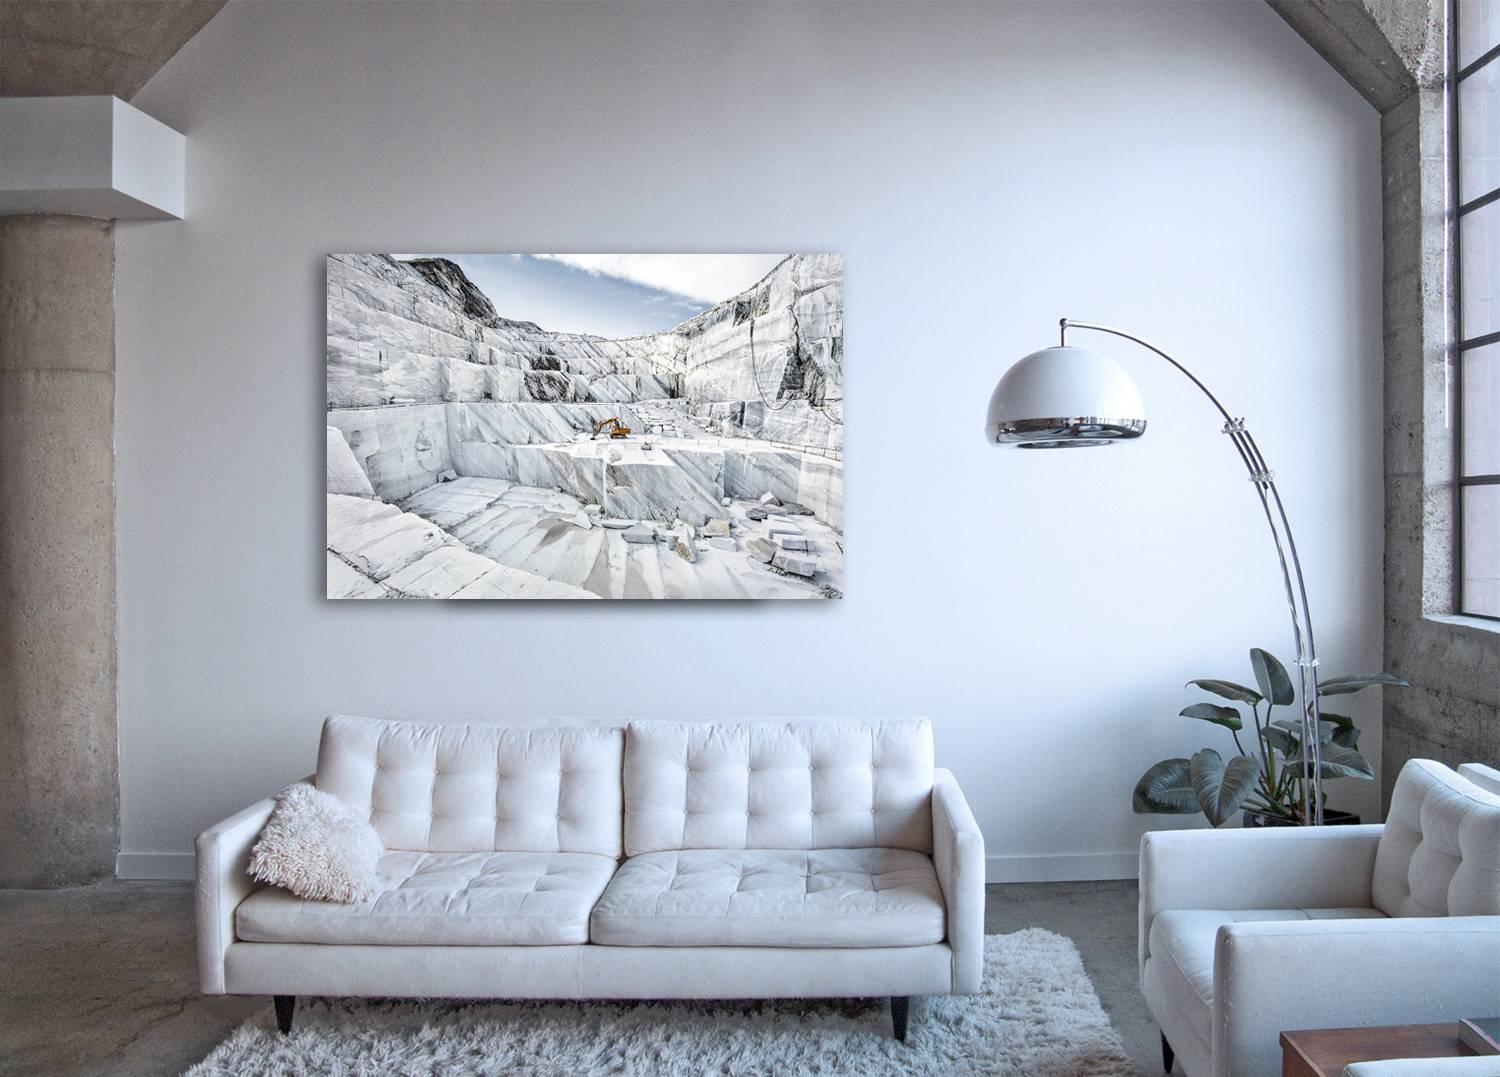 Marmo di Carrara (framed) - large format photograph of Italian marble quarry - Photograph by Frank Schott